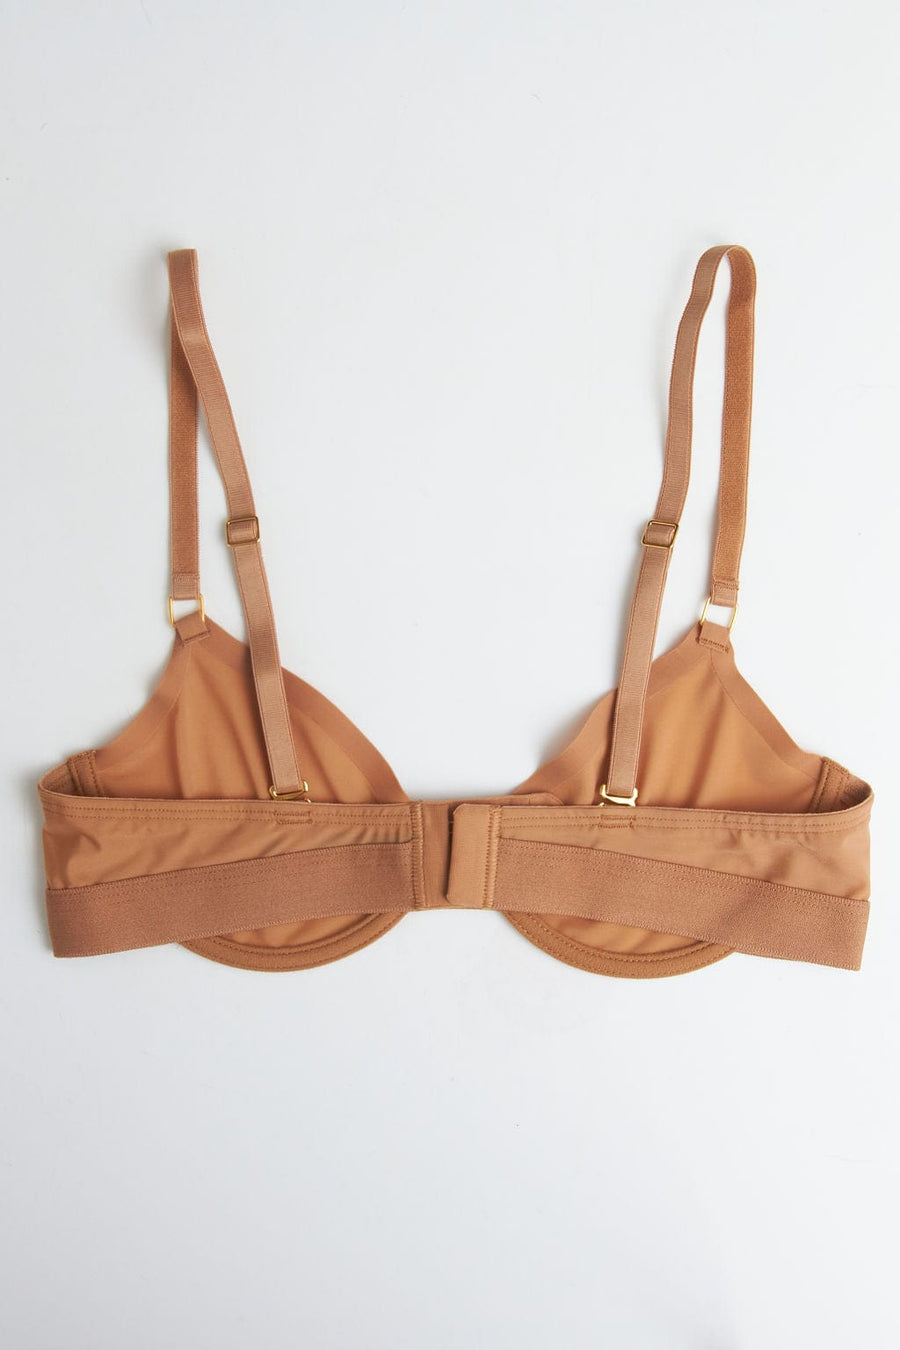 What are the benefits of unlined bras? Why are lined bras more